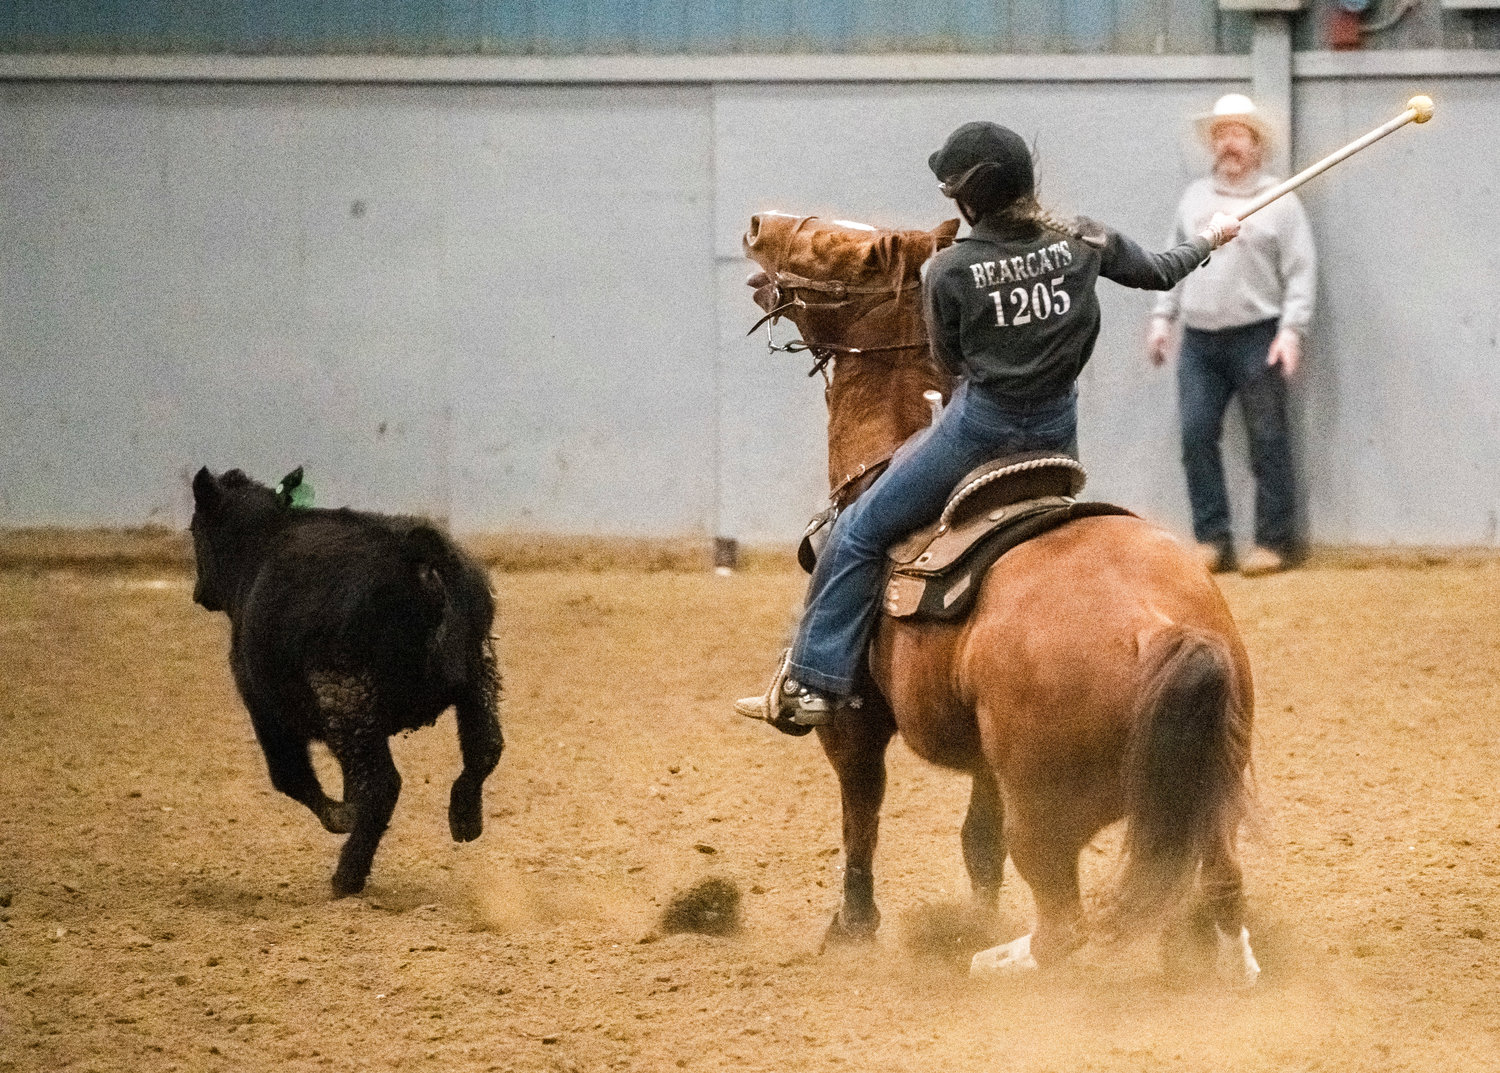 Savanna Dorning, of Adna, chases after a cow during a daubing competition for the W.F. West High School equestrian team during a district 6 meet on Sunday, March 19 at the Grays Harbor County Fairgrounds.